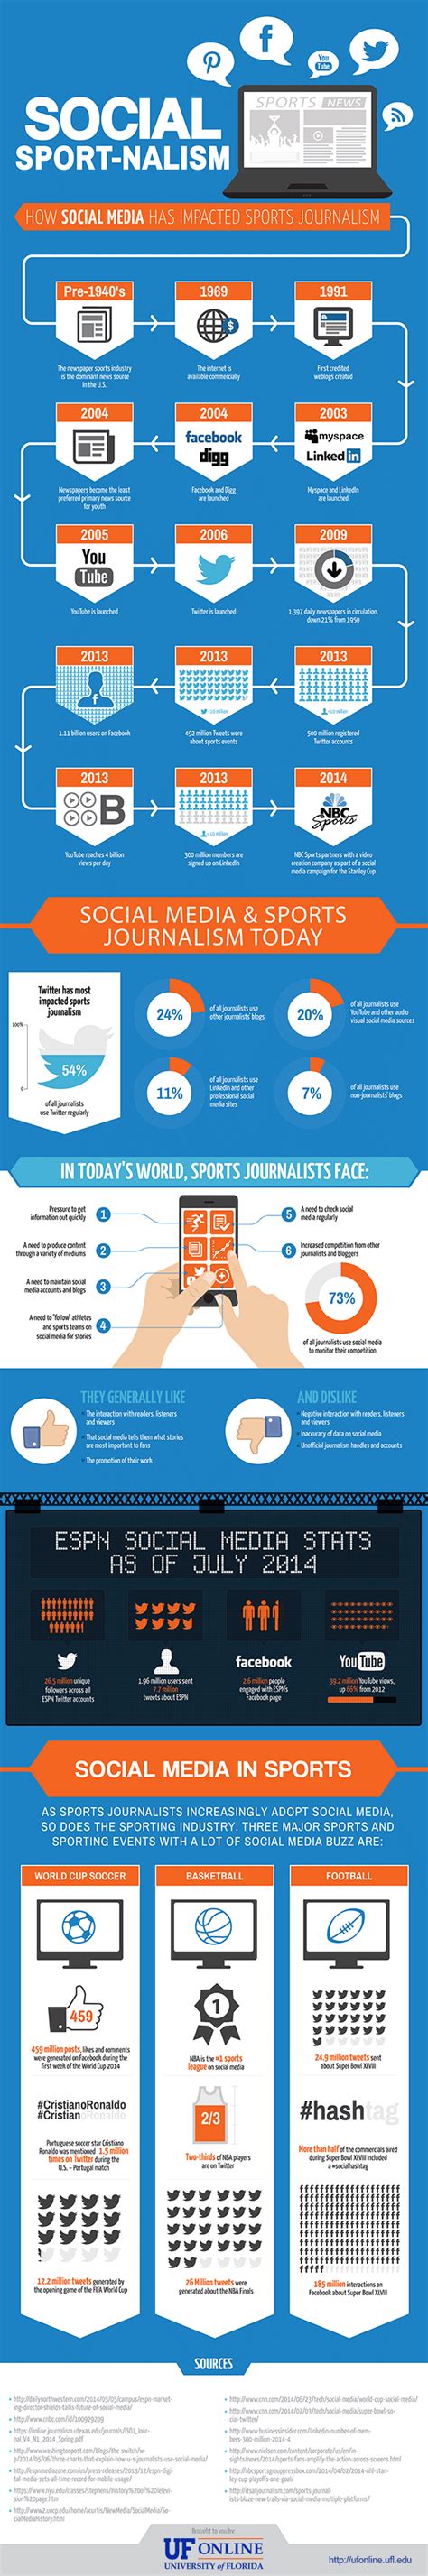 Social Media And Sports Journalism University Of Florida Online